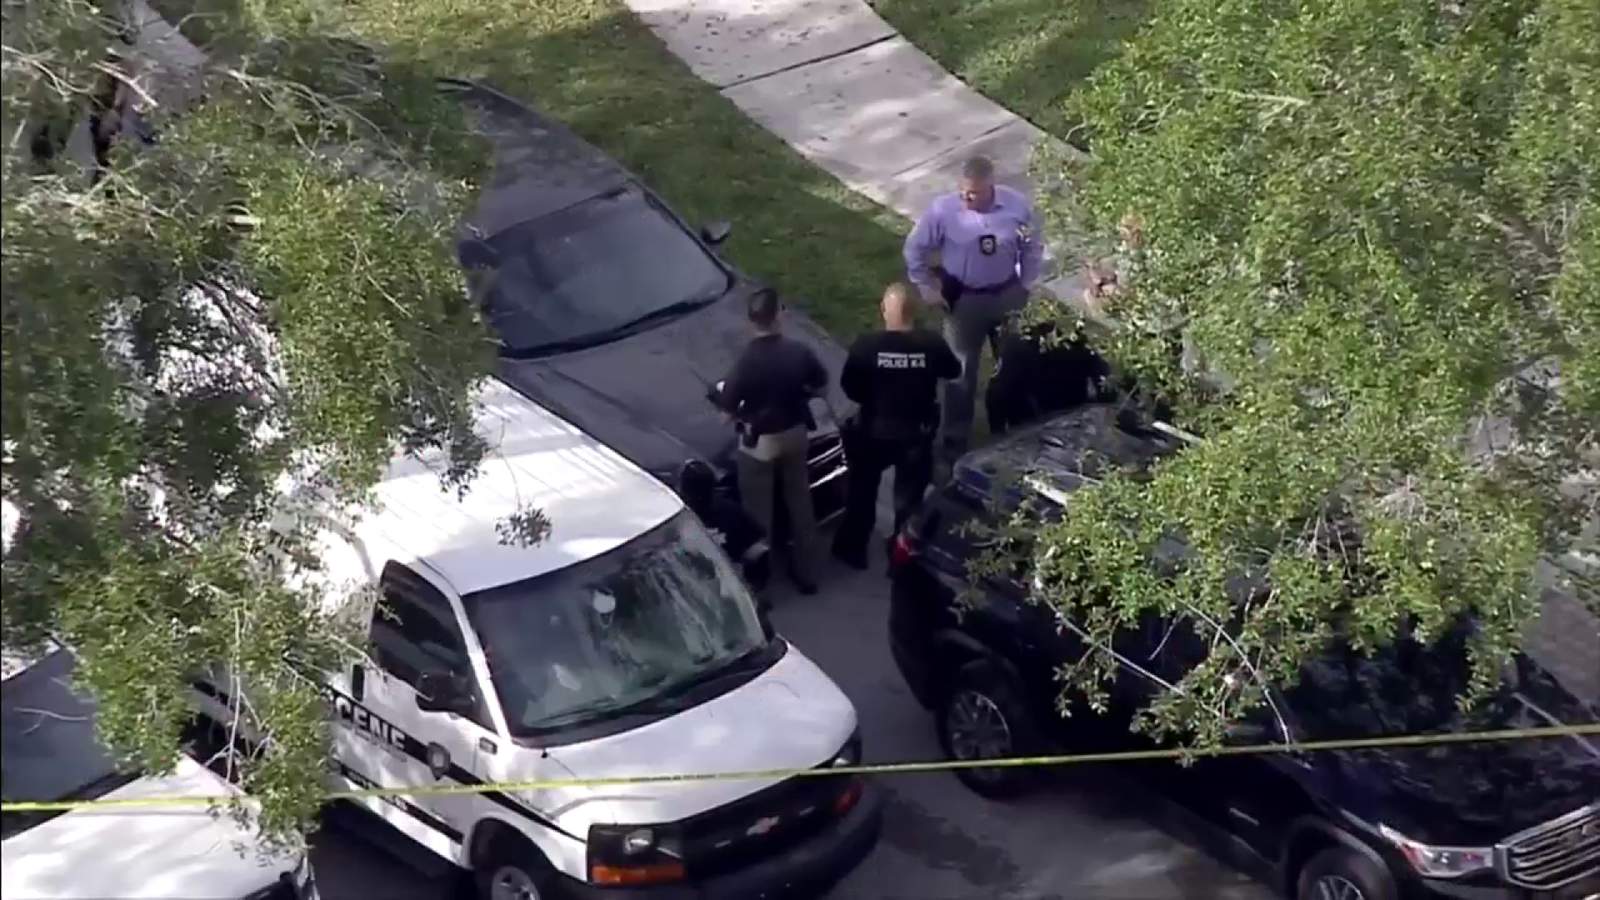 1 injured, 1 dead after domestic violence shooting in Pembroke Pines